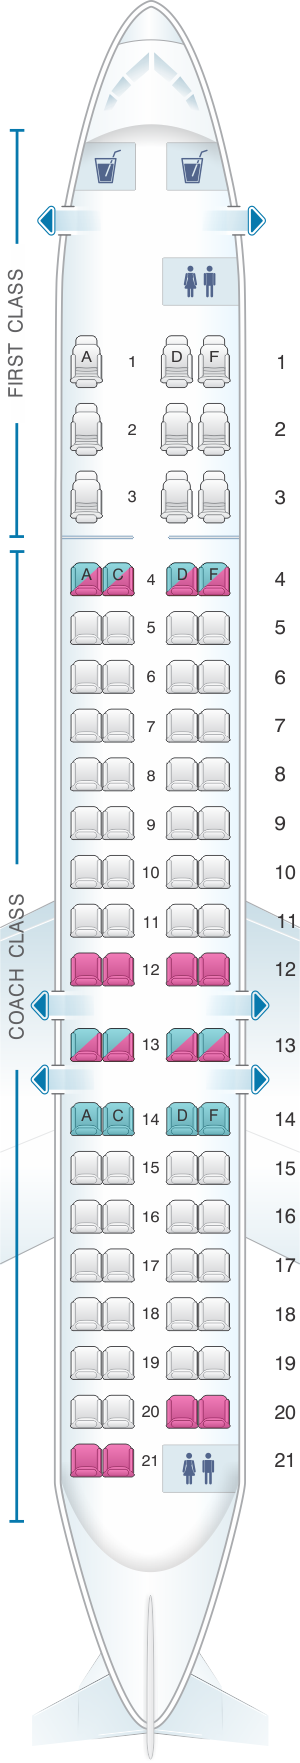 Seat map for US Airways Bombardier Canadair CRJ 900 79pax